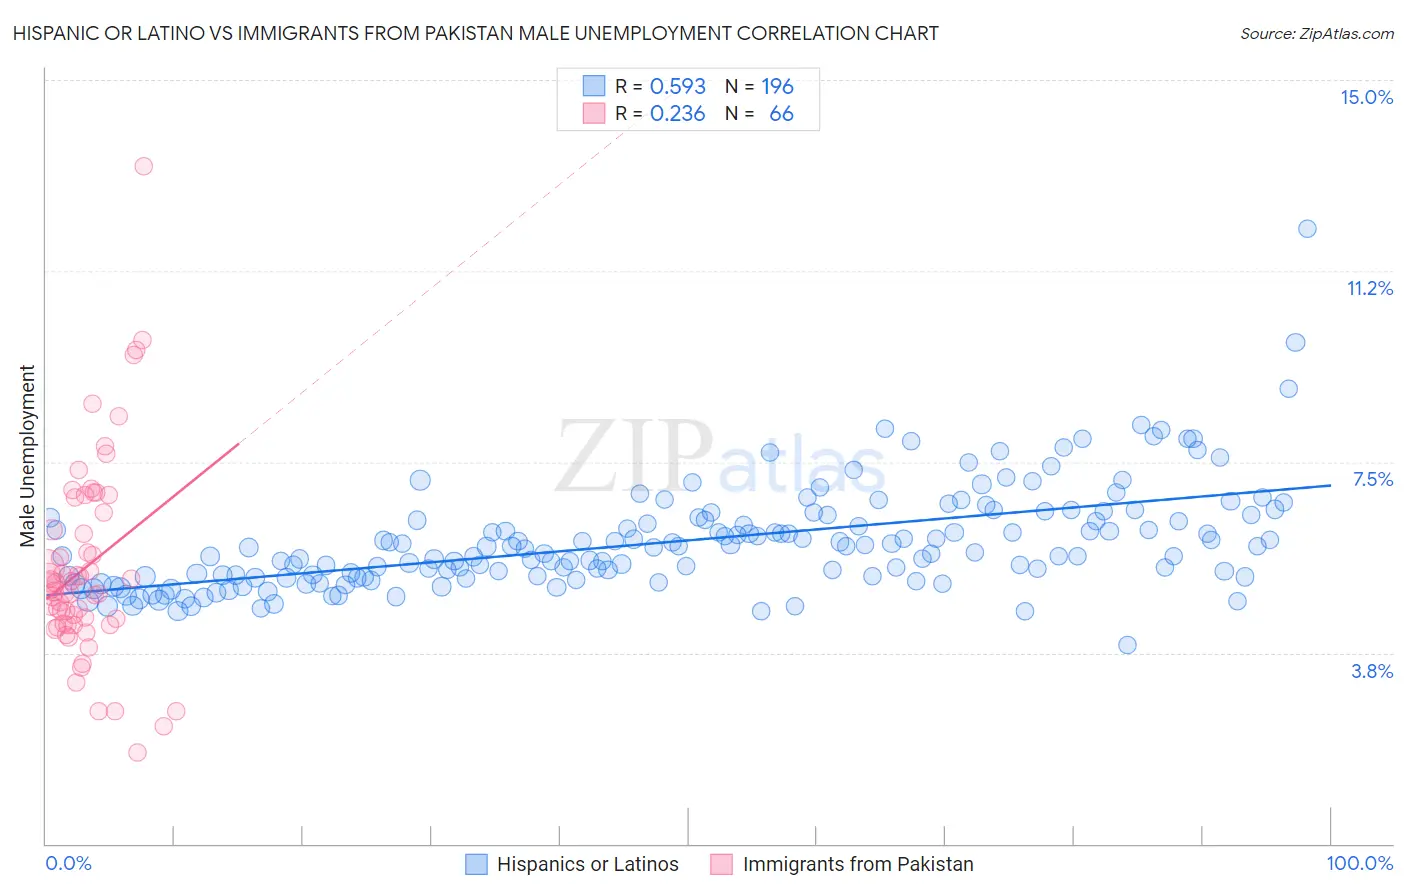 Hispanic or Latino vs Immigrants from Pakistan Male Unemployment